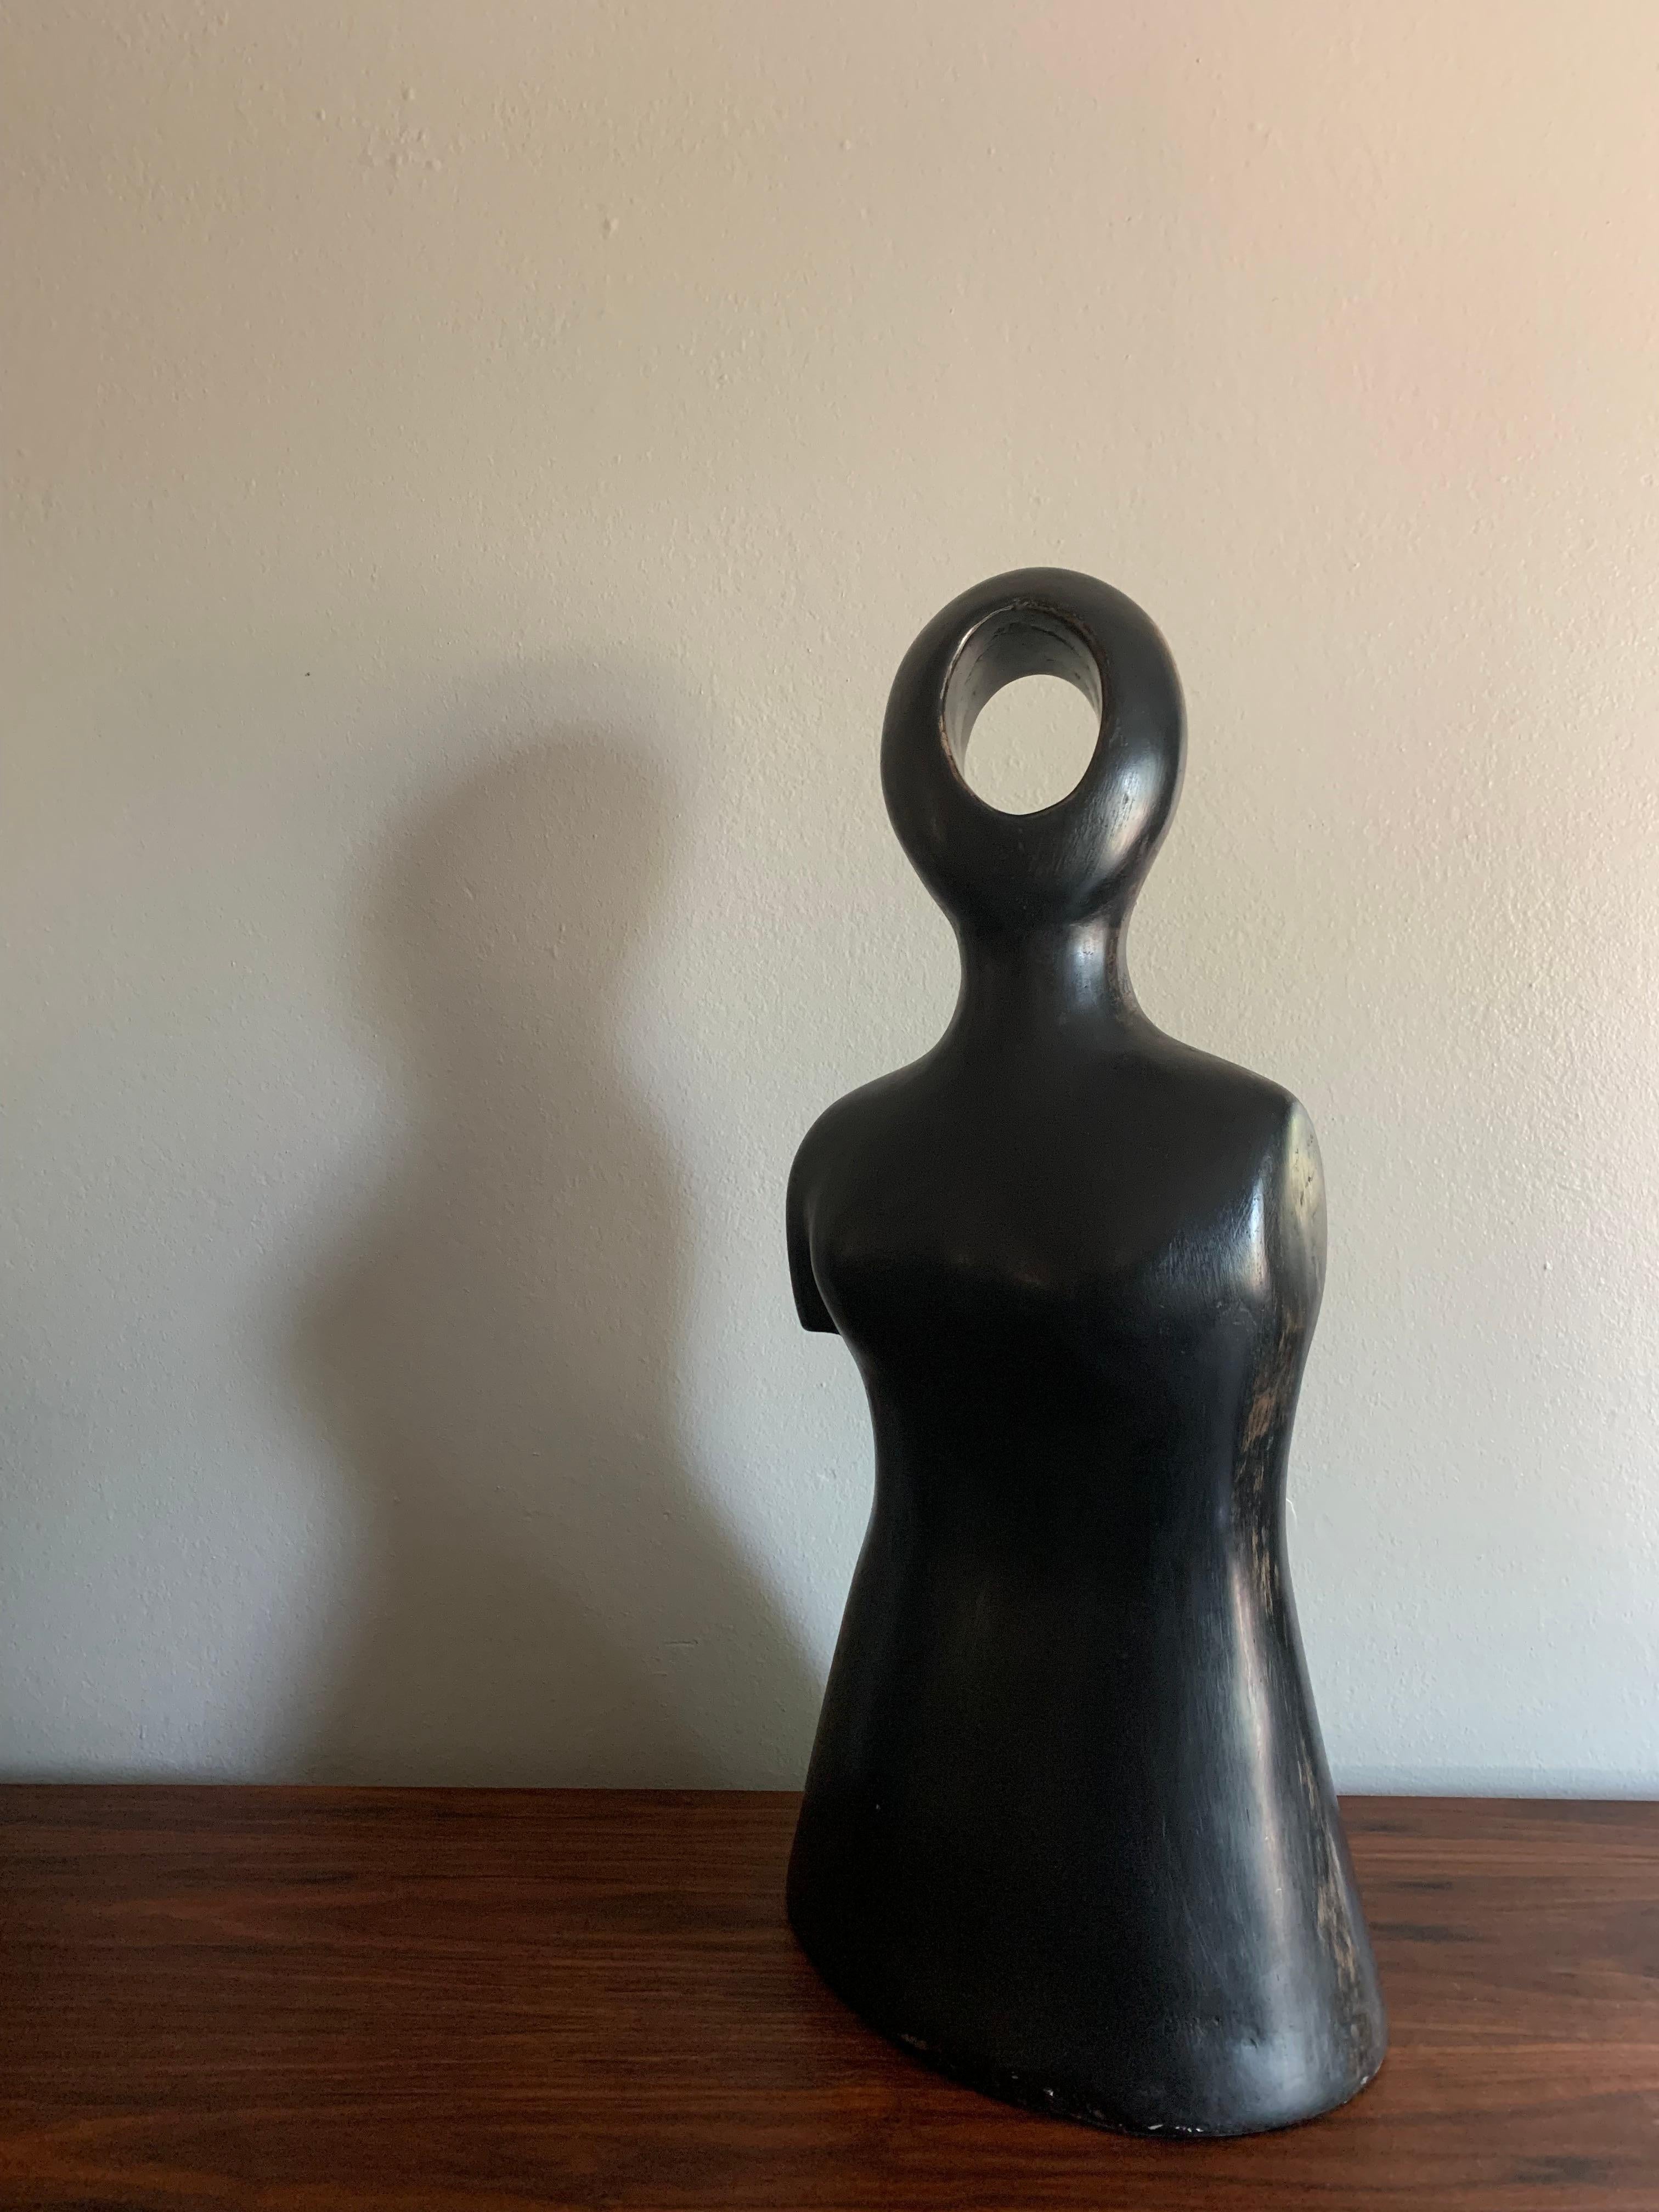 A sculpture of a figure by Yuri Zatarain from the Black Line. Made of resin with a huengue finish. This piece has been authenticated by Yuri Zatarain's gallery.